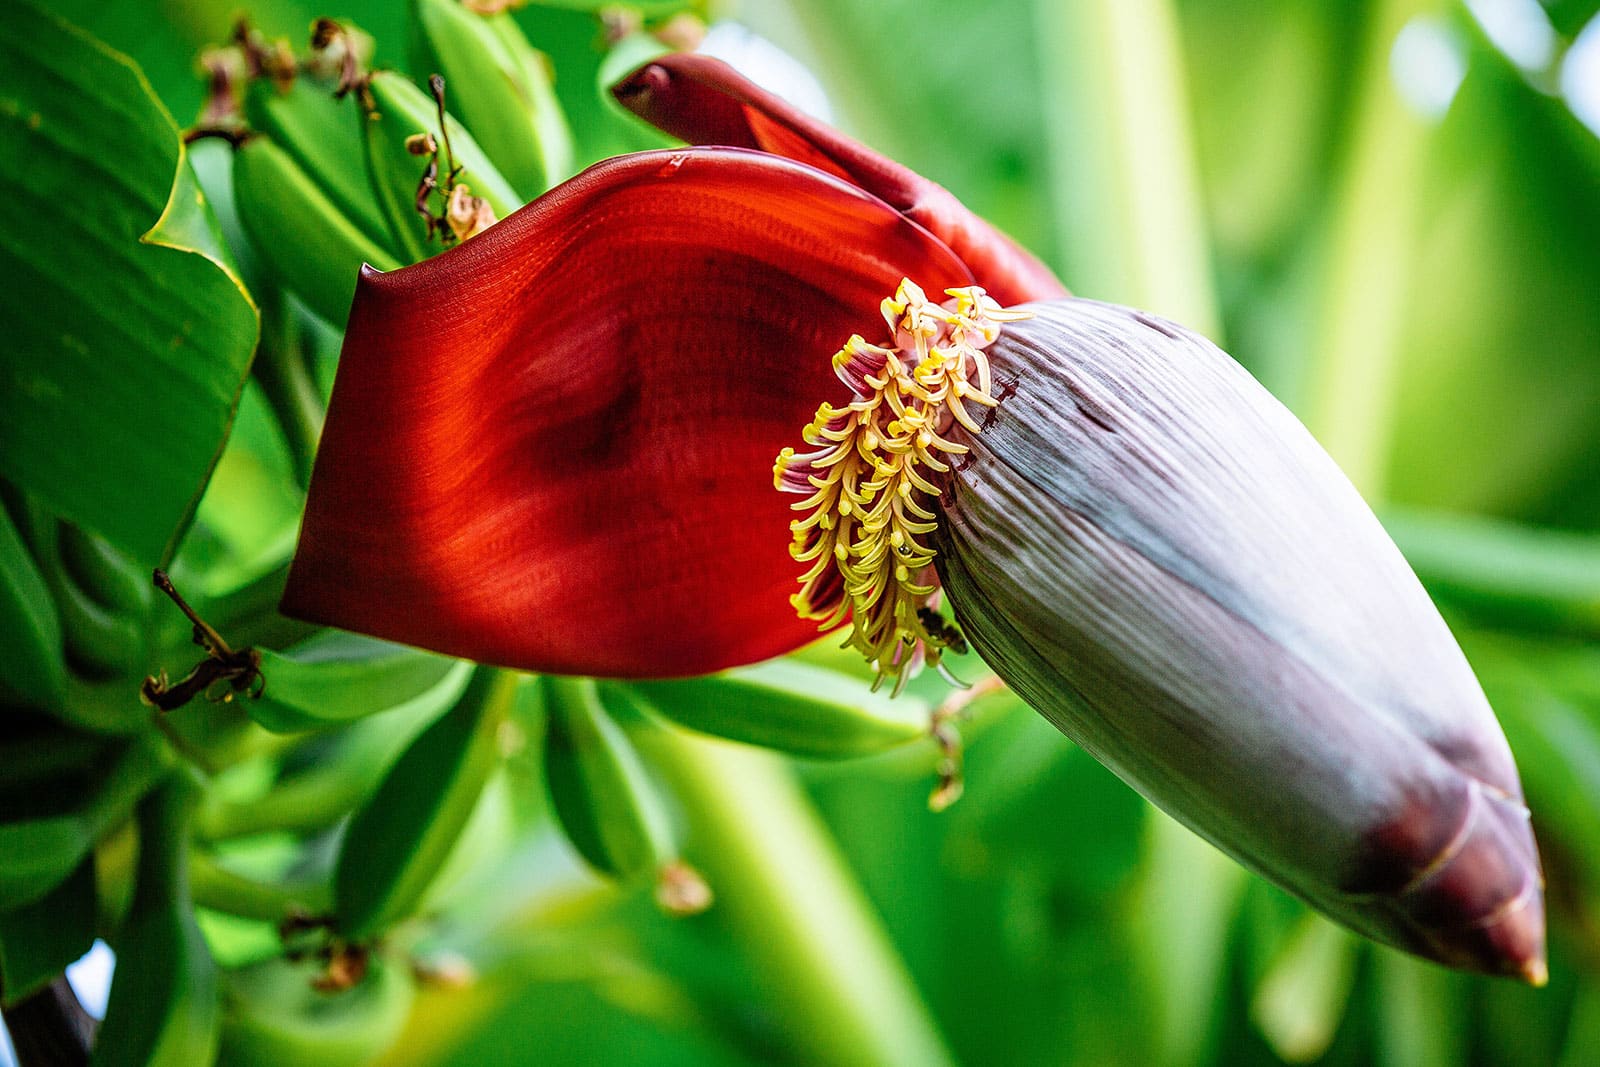 Banana flowers, an unexpected superfood: what they are and how to eat them